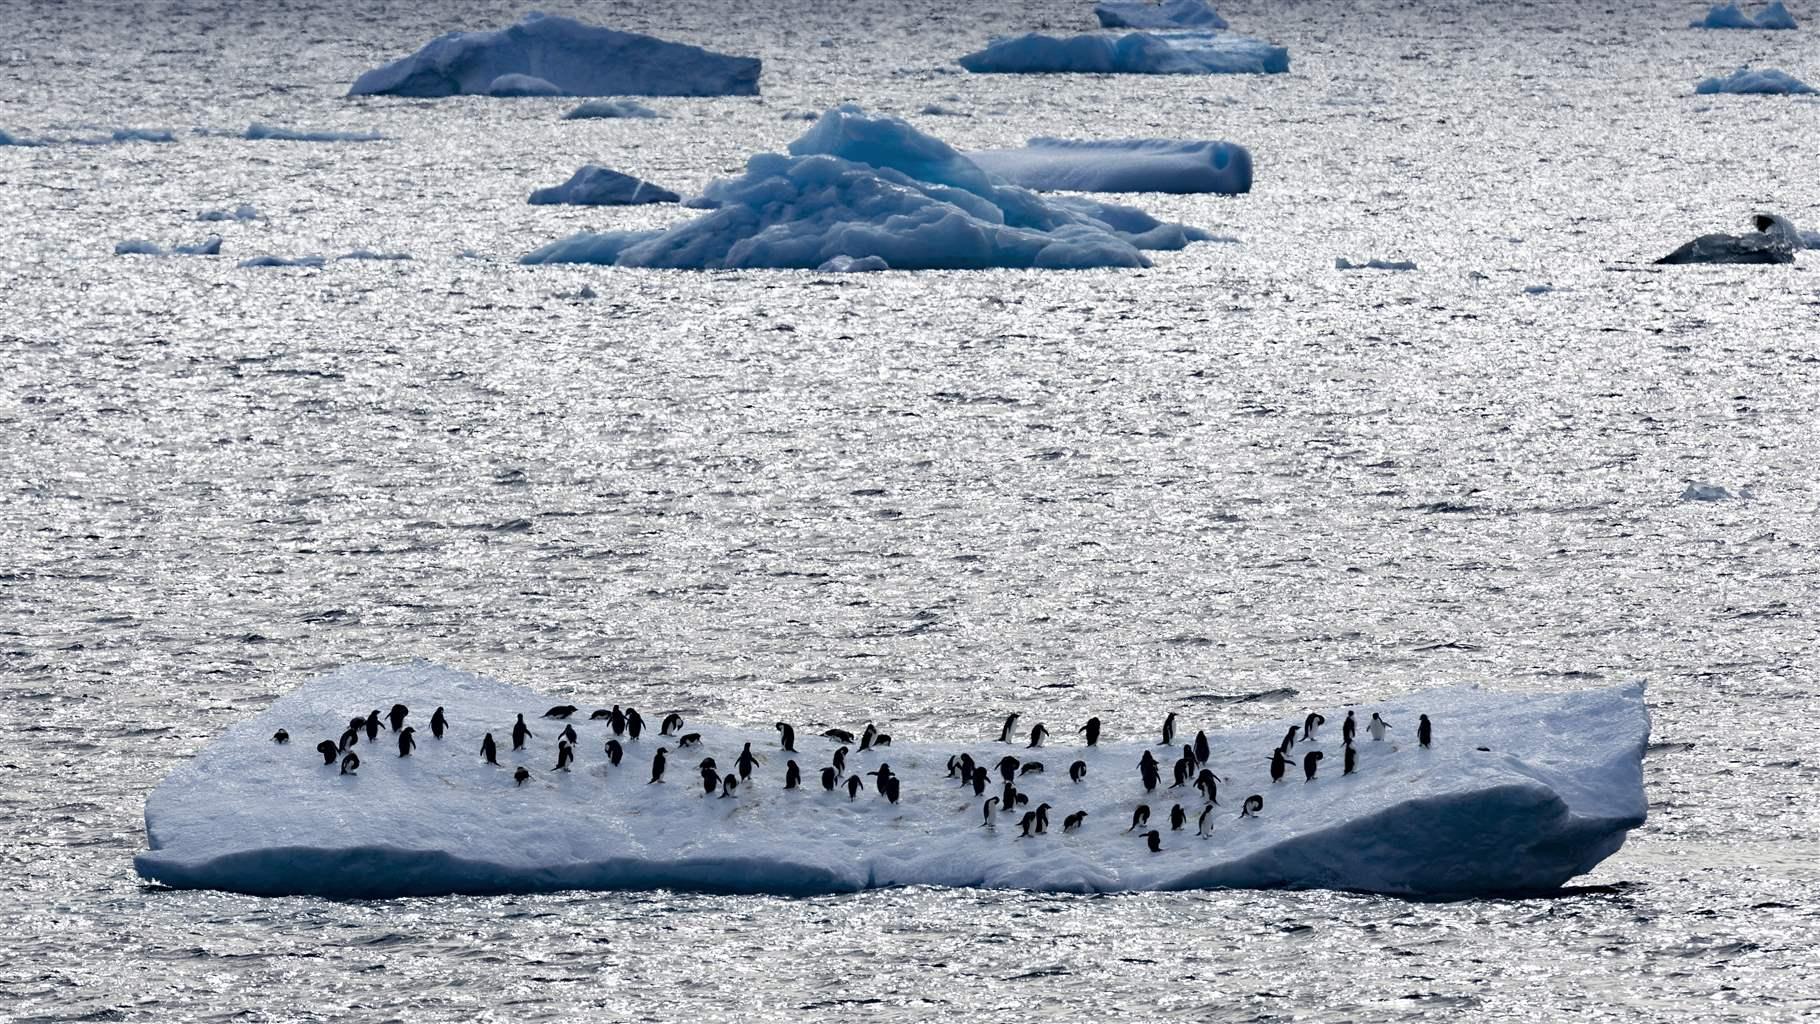 A few dozen penguins stand on an iceberg on a sea that appears a shimmering grey due to the reflection of the sun. Many other icebergs are visible, and in the far background is the edge of what appears to be a very large ice sheet.